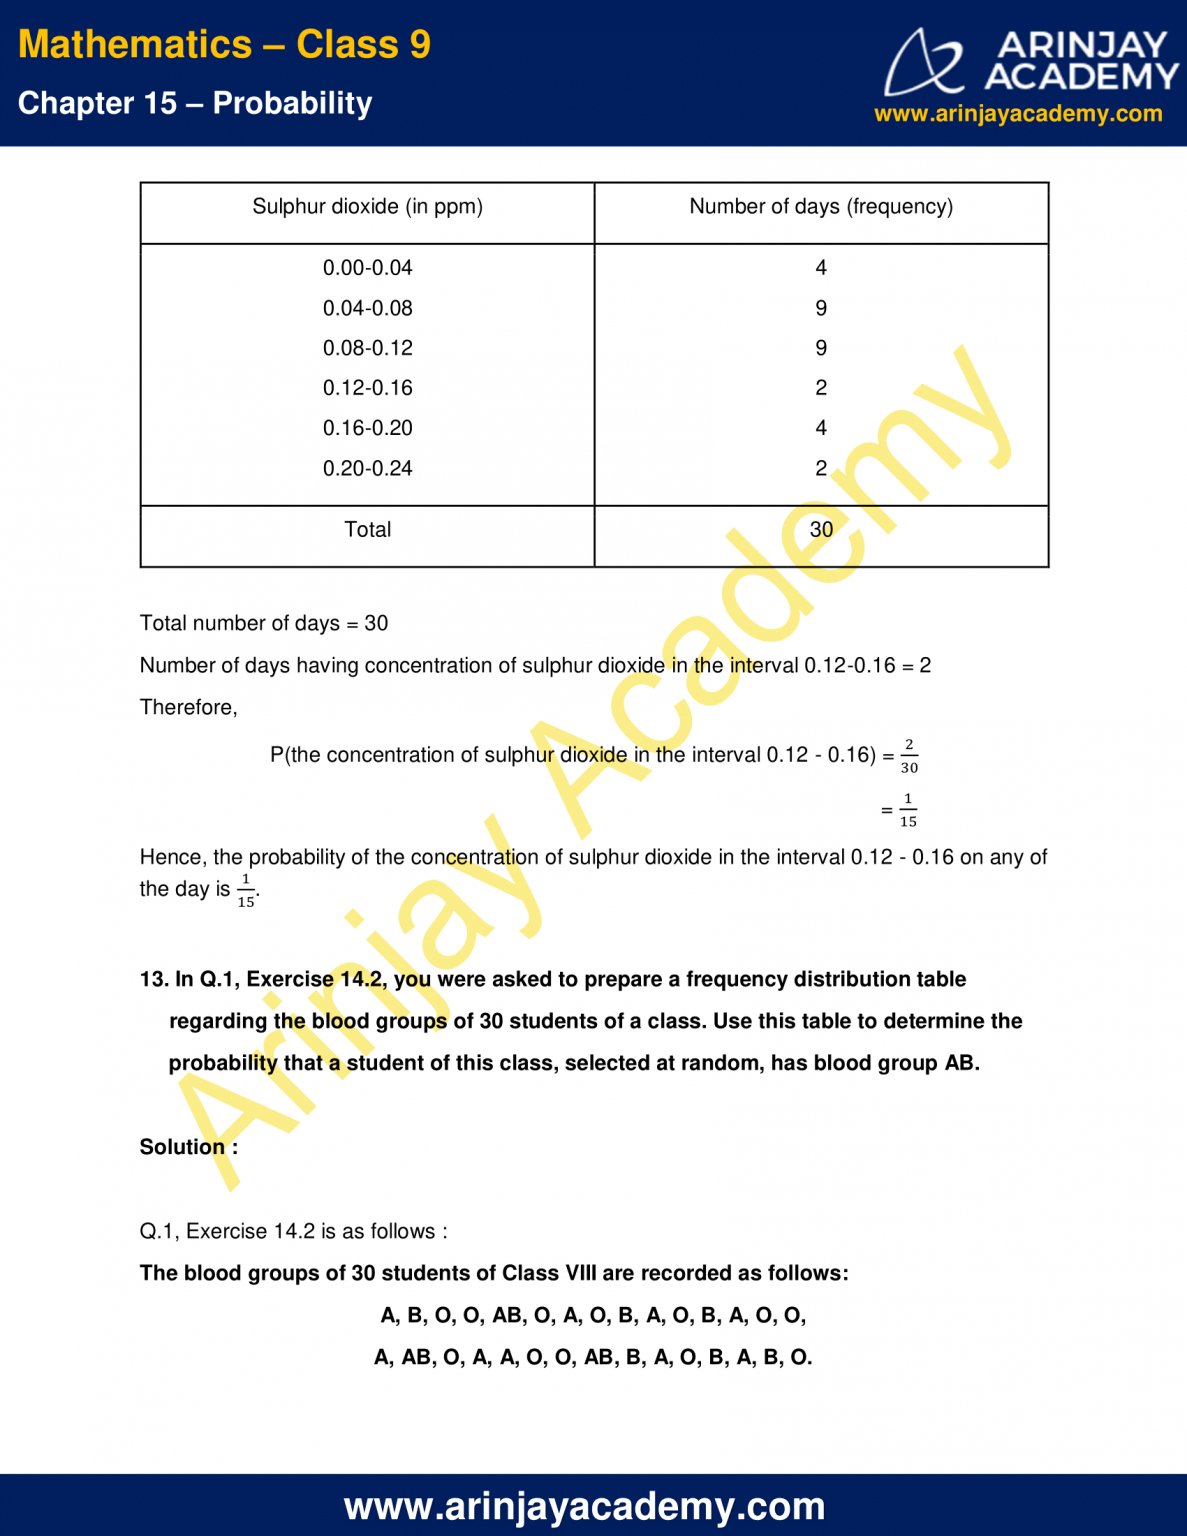 assignment on probability class 9